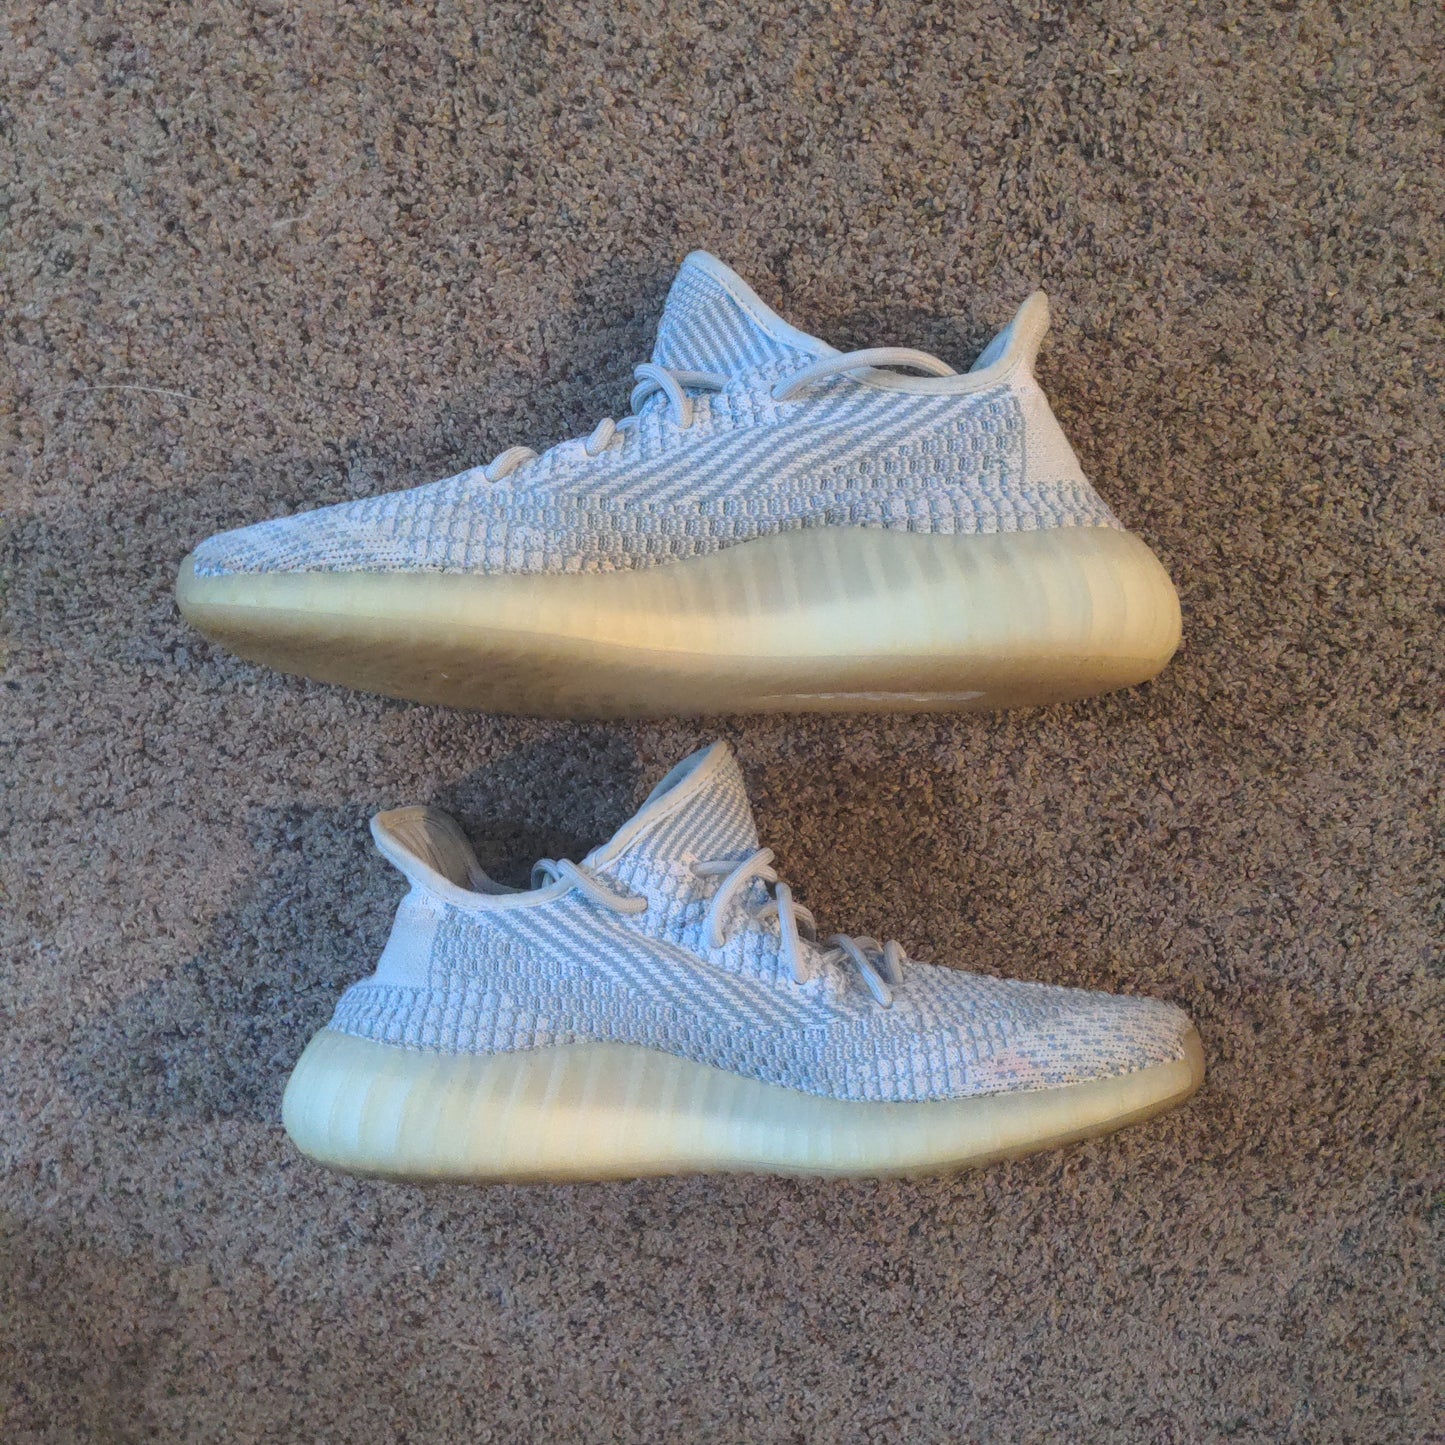 Adidas Yeezy 350v2 - Cloud White - Pre Owned